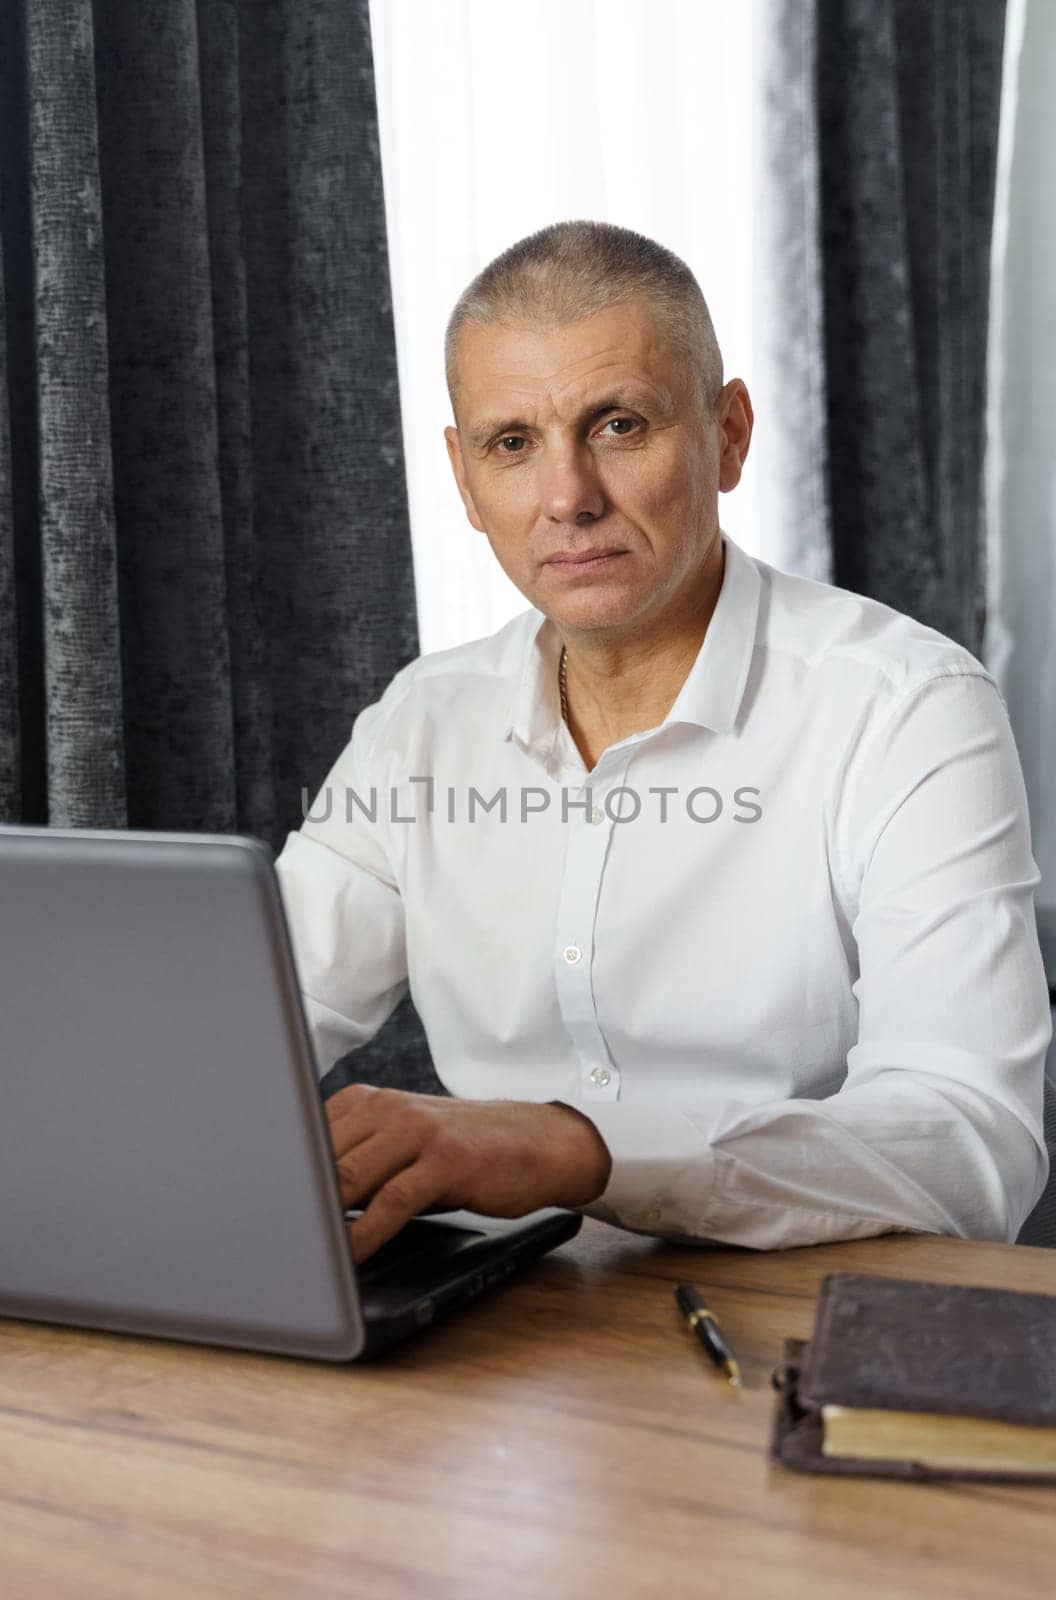 Portrait of middle aged business man working at home with laptop. by Sd28DimoN_1976